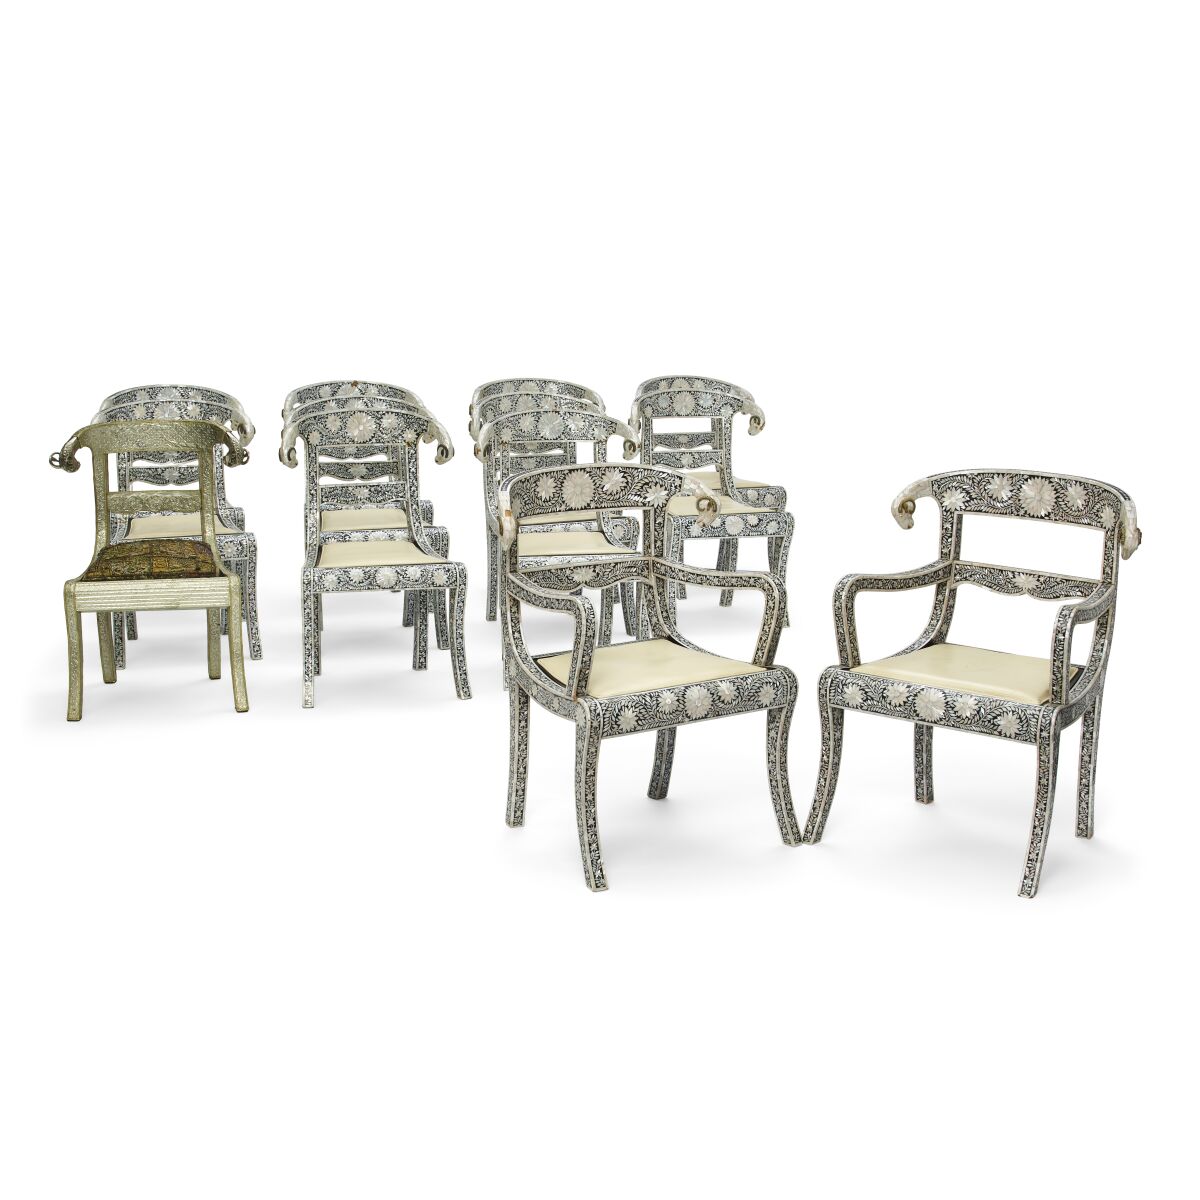 A set of decorative chairs.